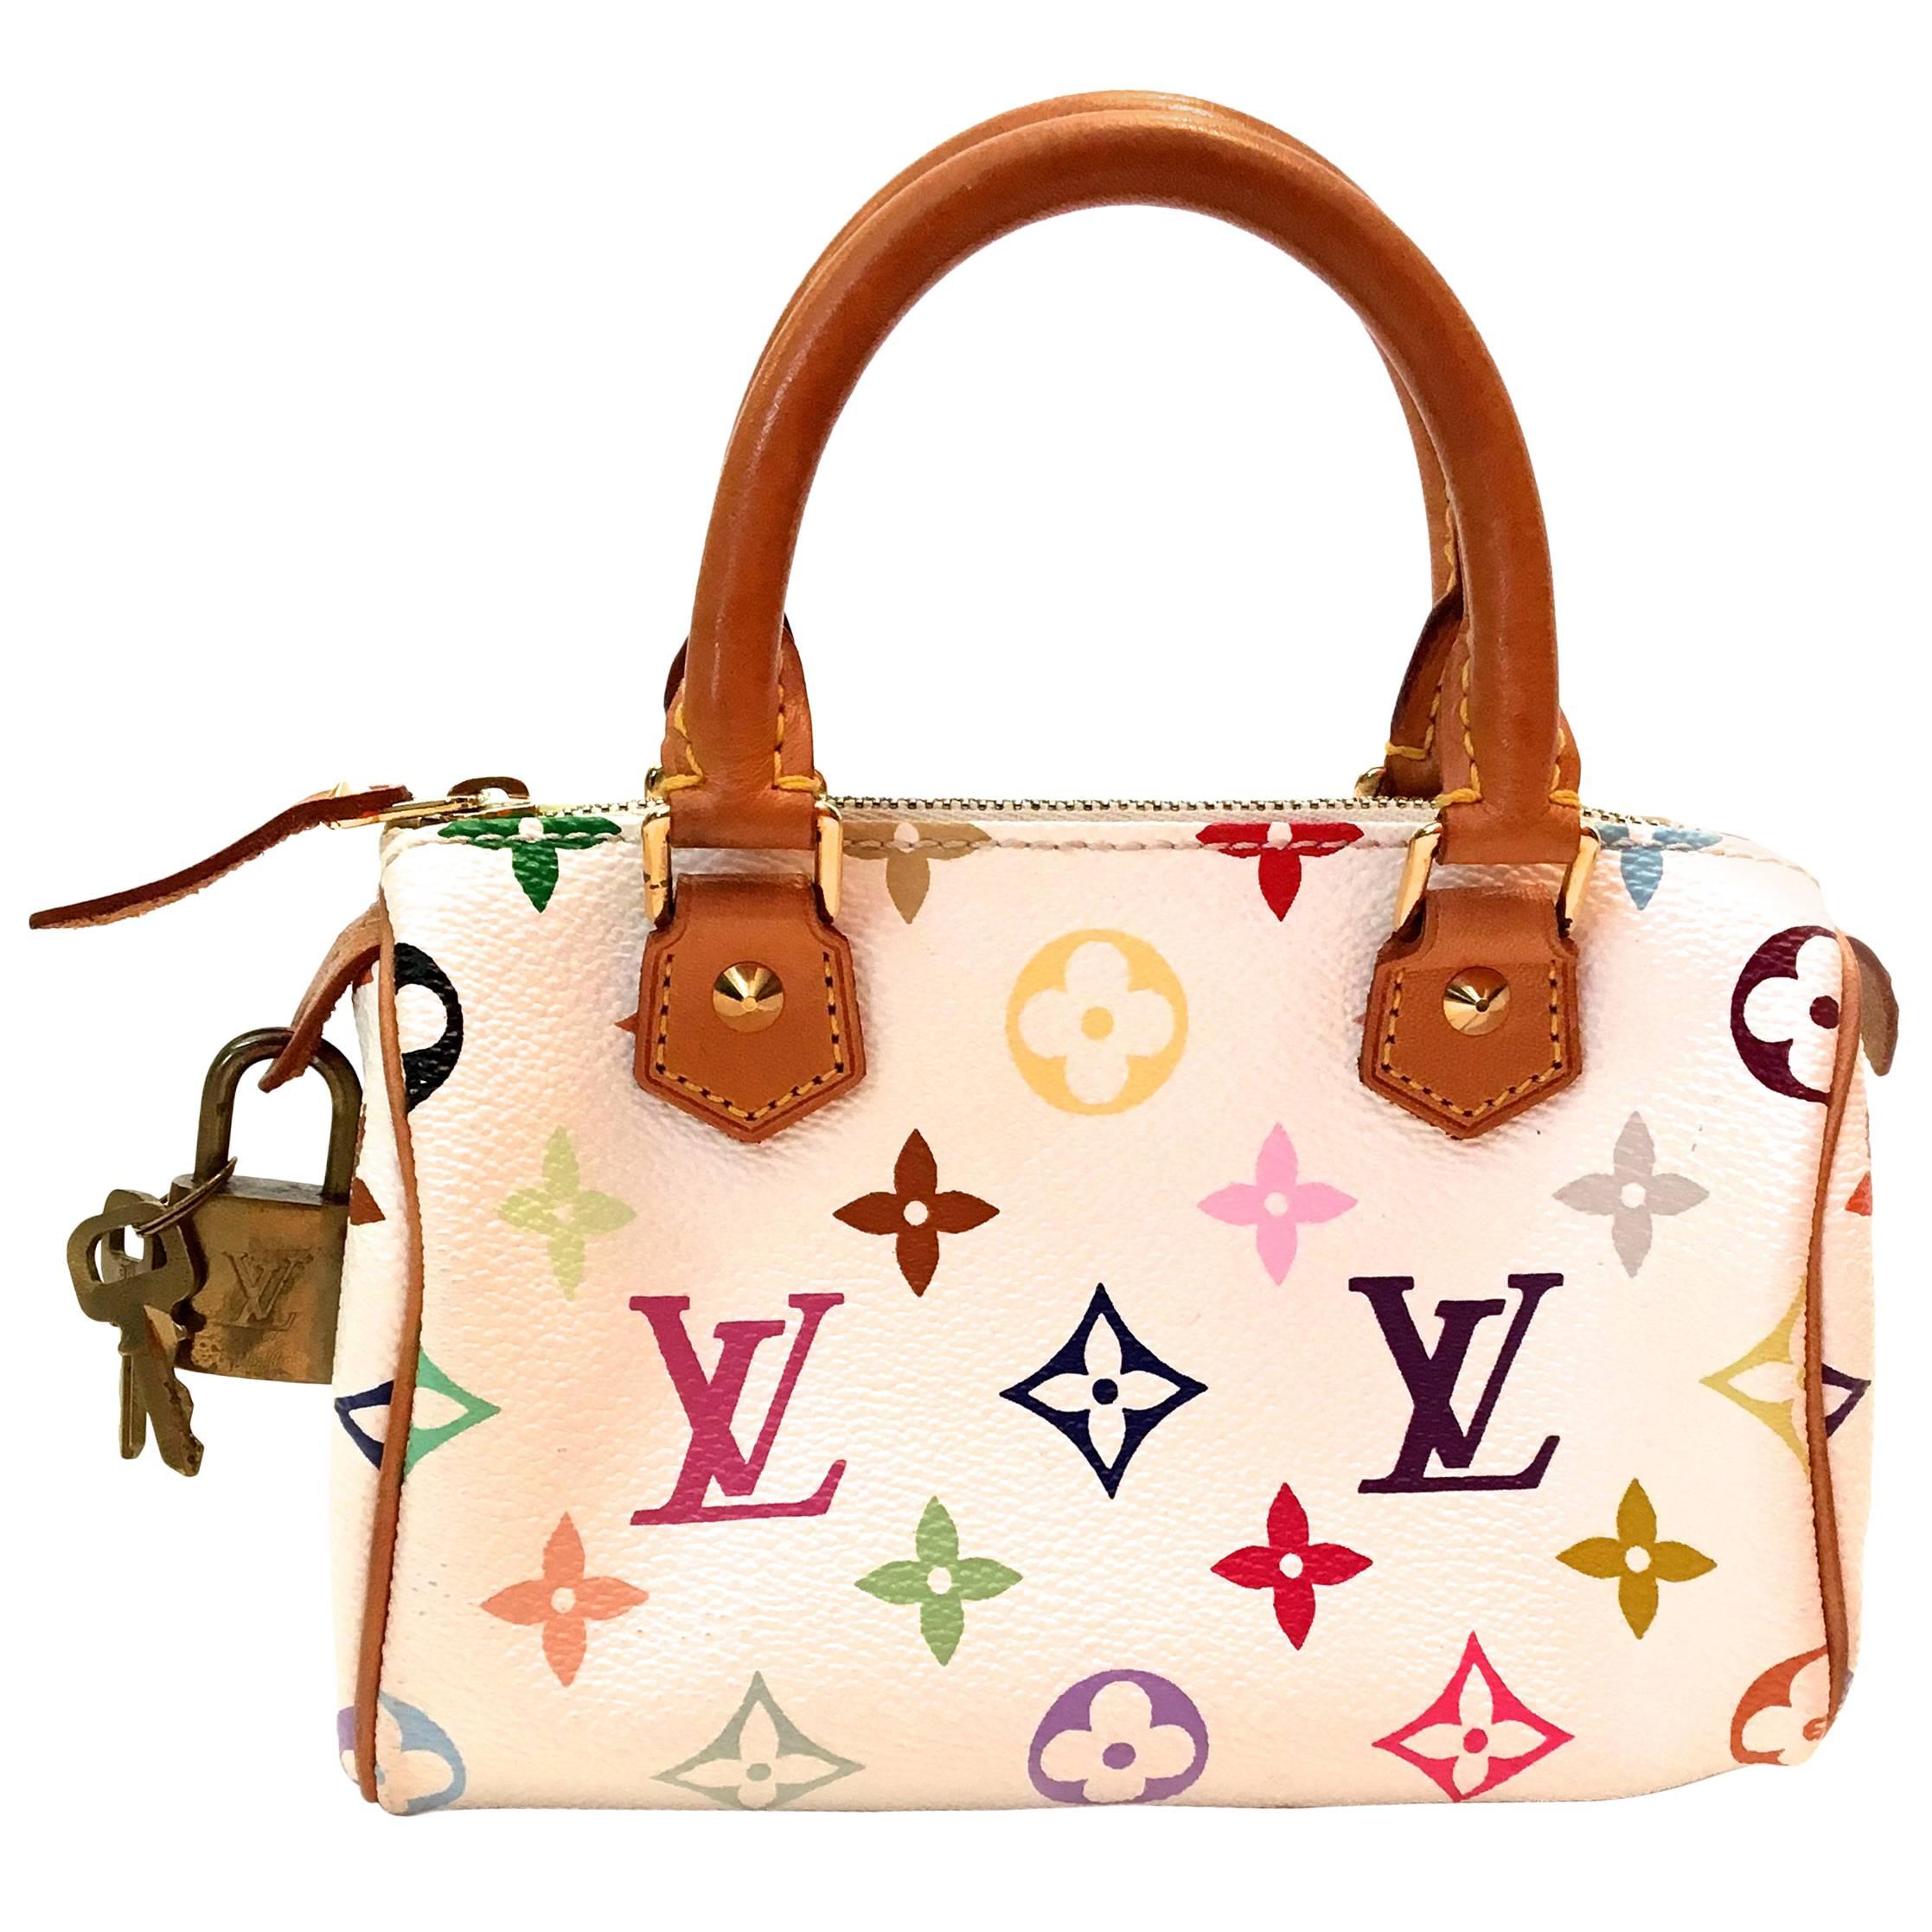 Presented here is a Mini Keepall from Louis Vuitton with a shoulder strap. This particular Mini Keepall is a discontinued style and extremely difficult to find. It is the standard tan leather with white leather background with the classic iconic